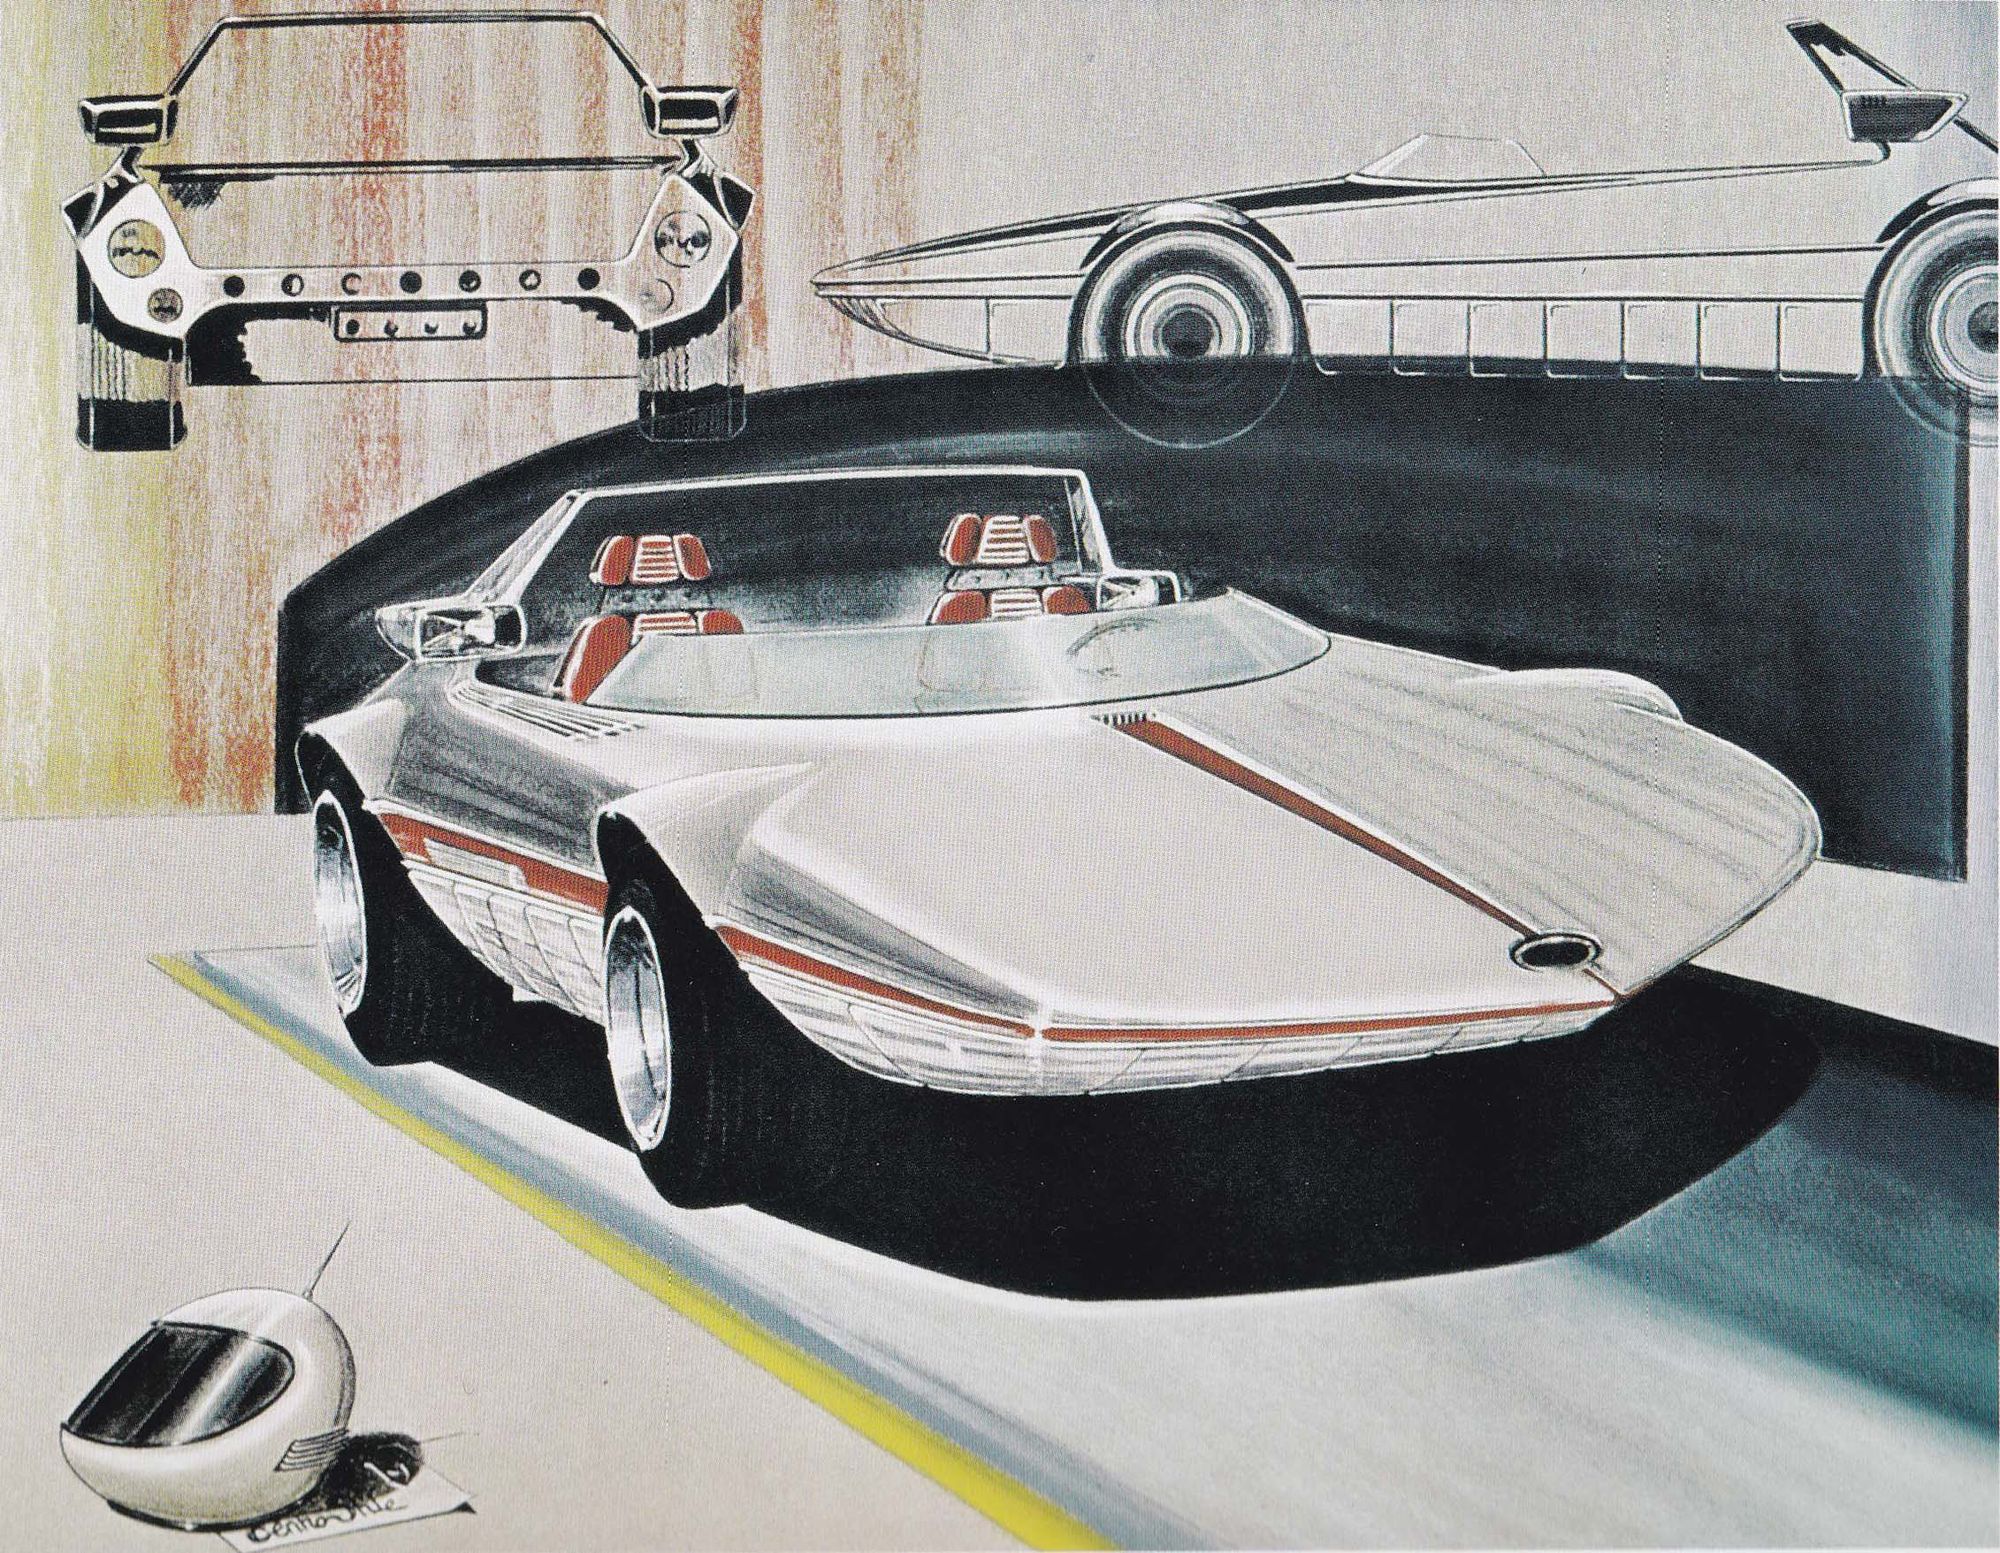 How speedboats inspired the Autobianchi A112 Runabout, one of Bertone's most delightful concept cars of the 1960s